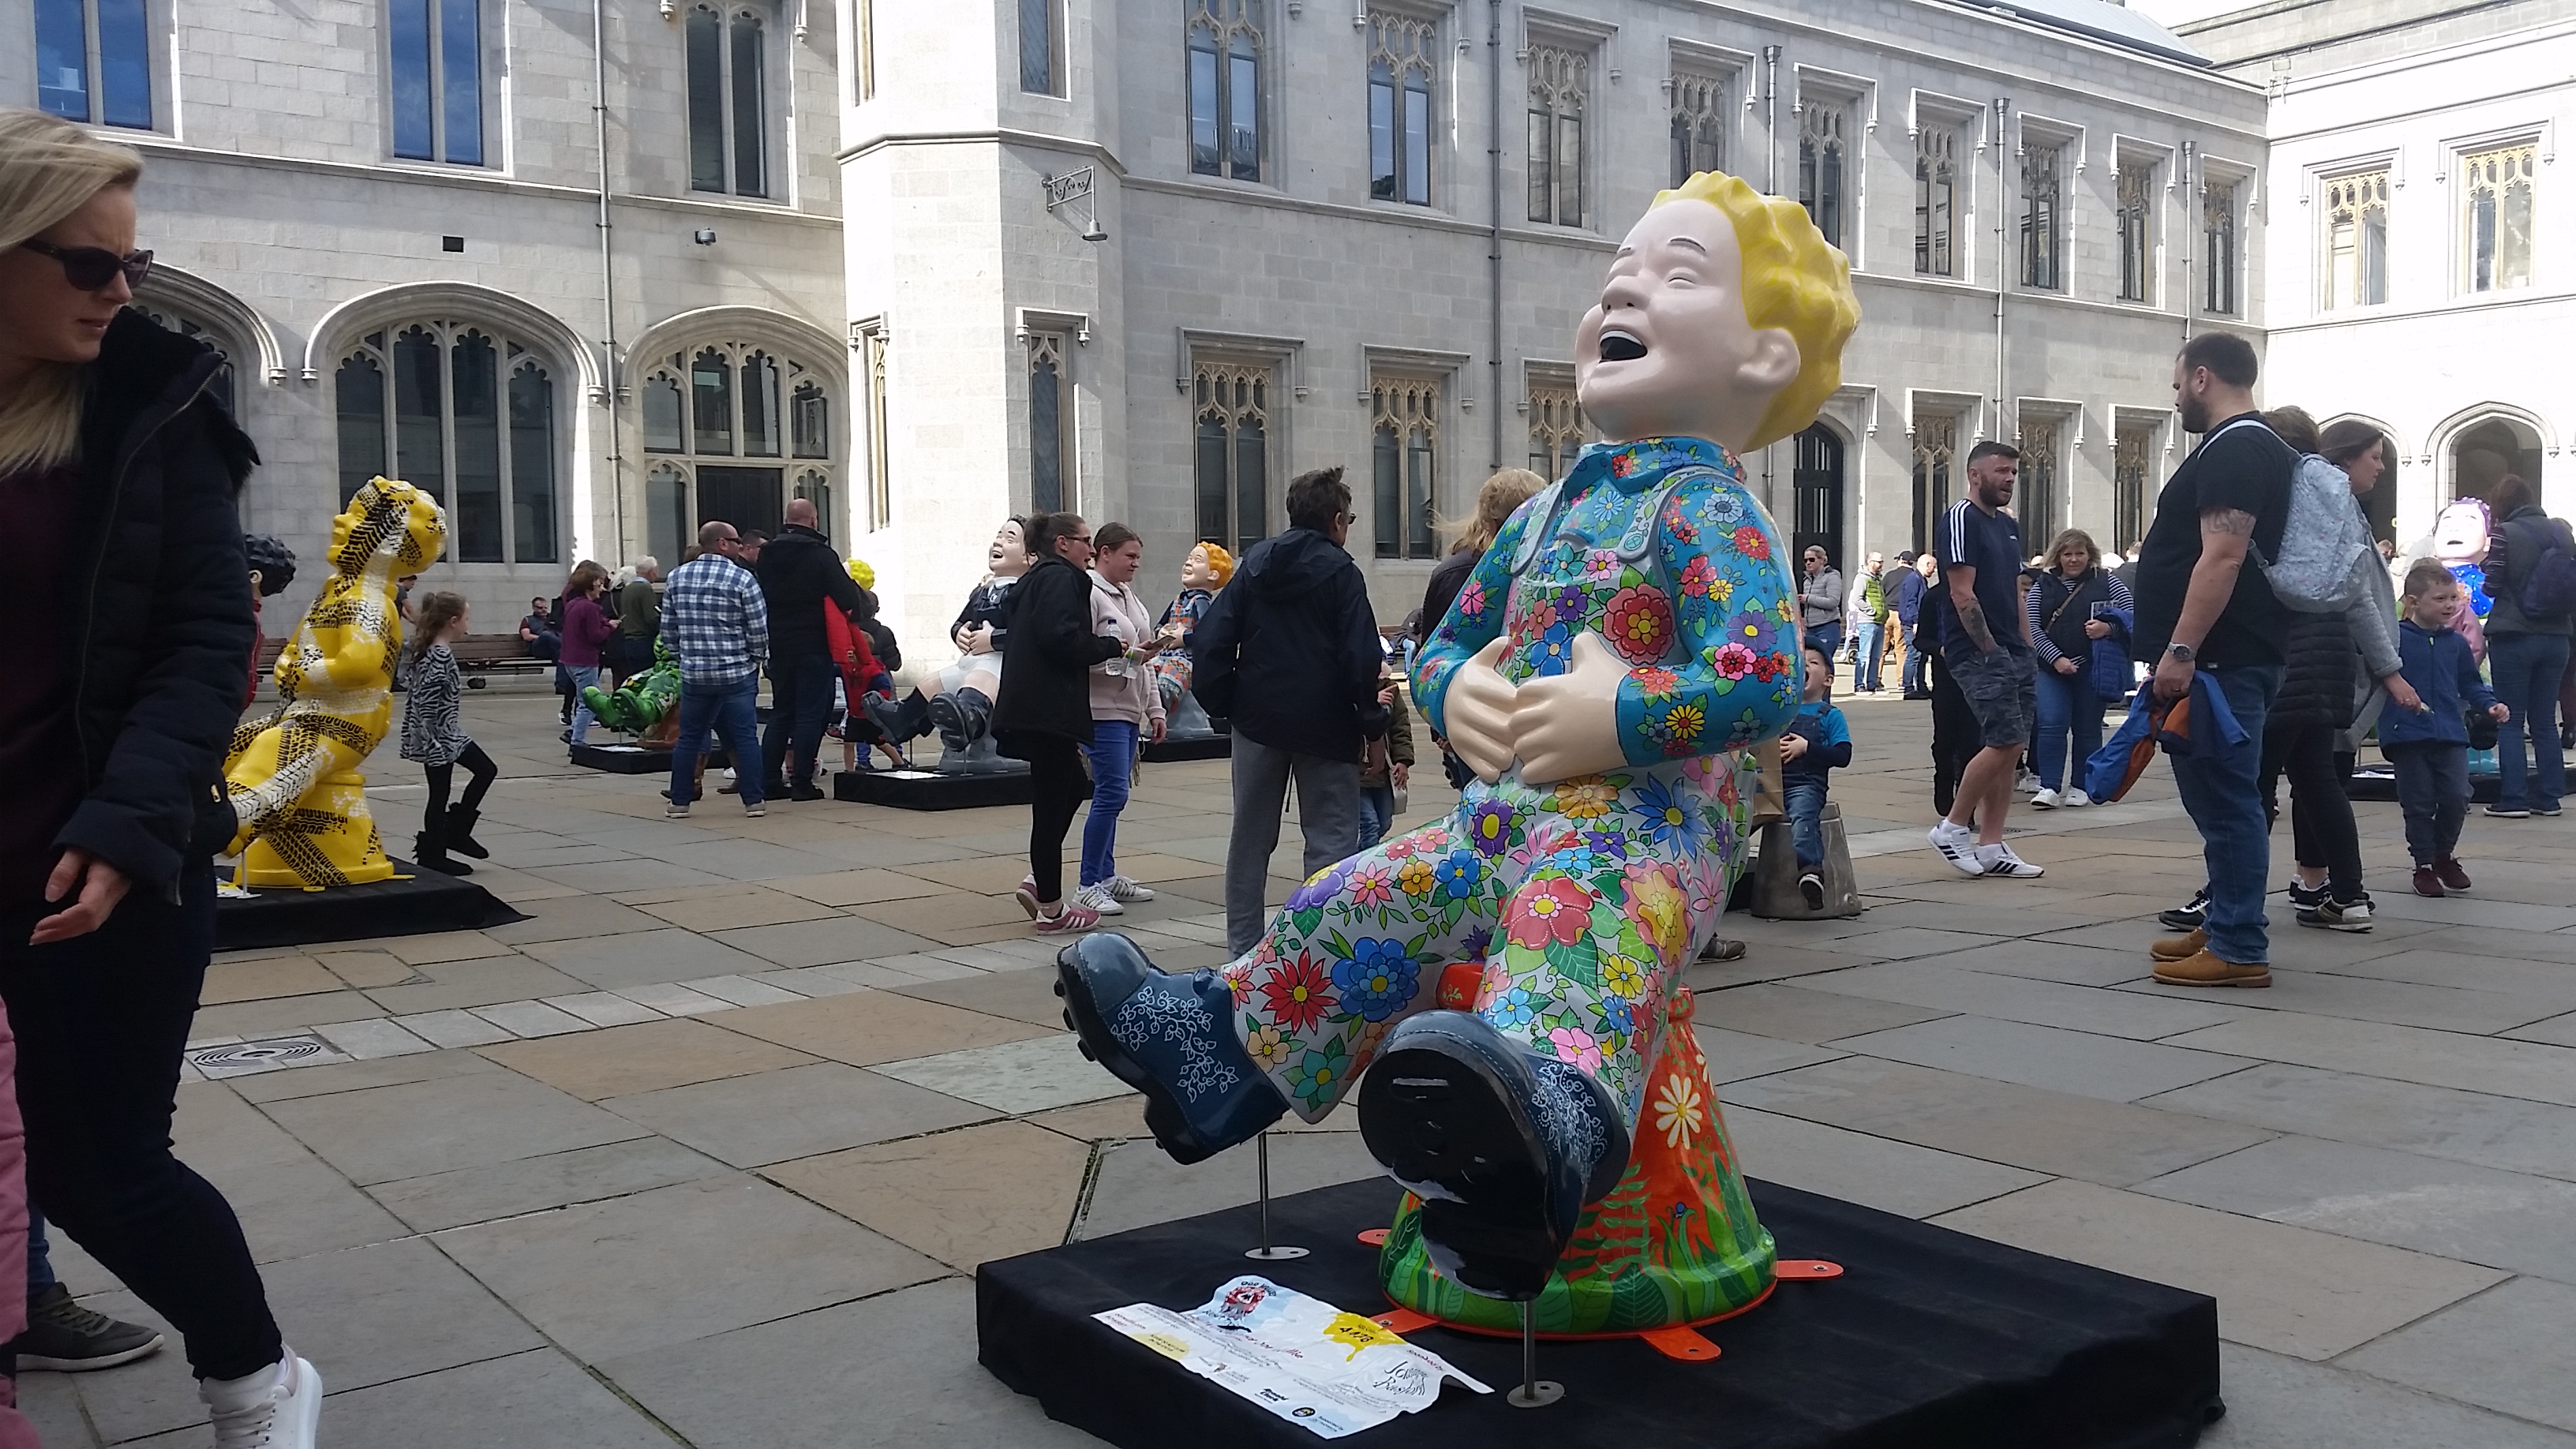 The Oor Wullie Big Bucket Trail is raising cash for charity